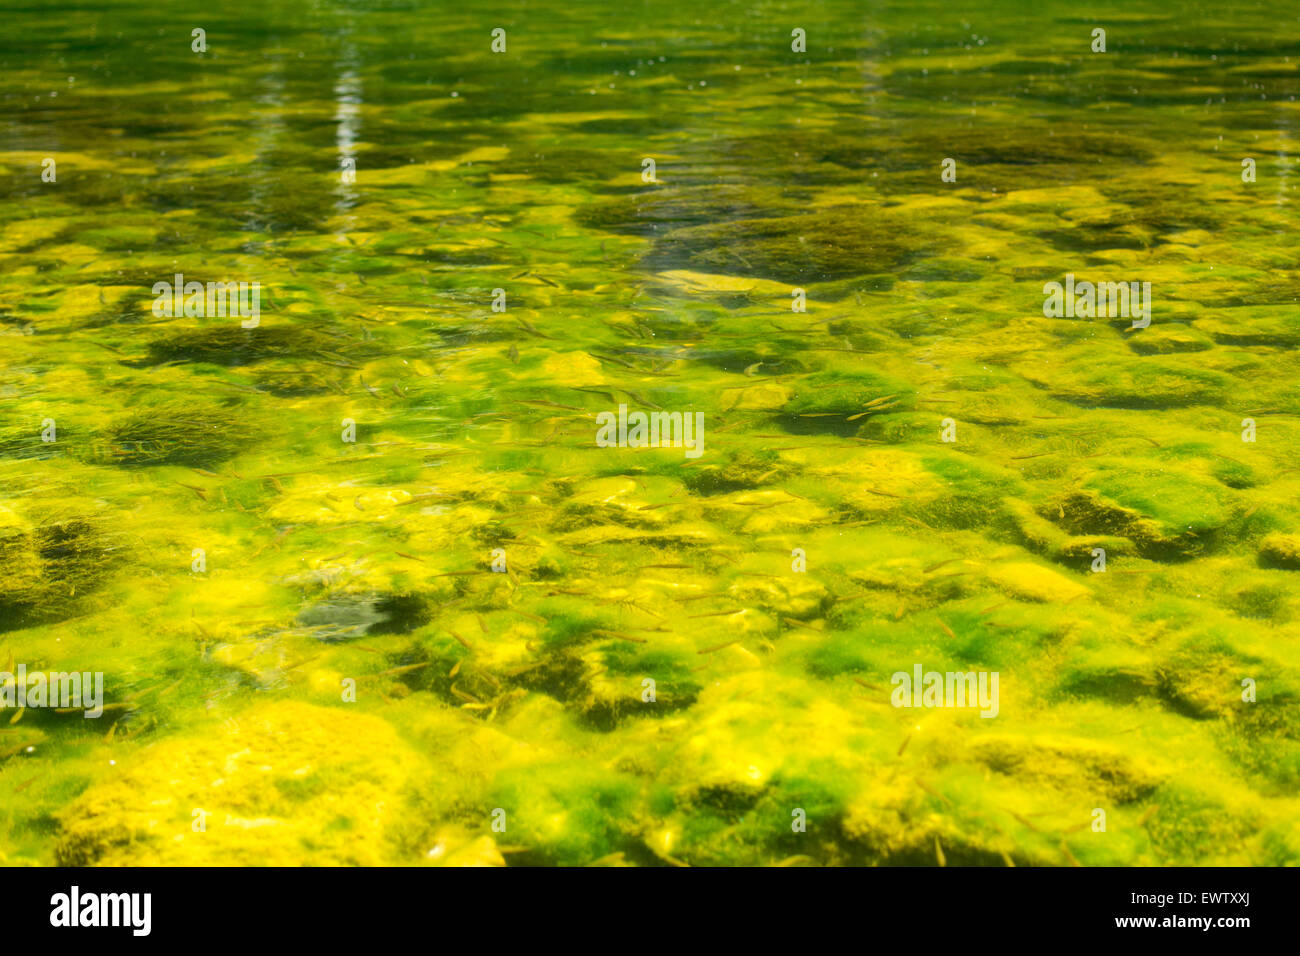 Fish swimming in a river in sunlight obscured by geen water and algae Stock Photo